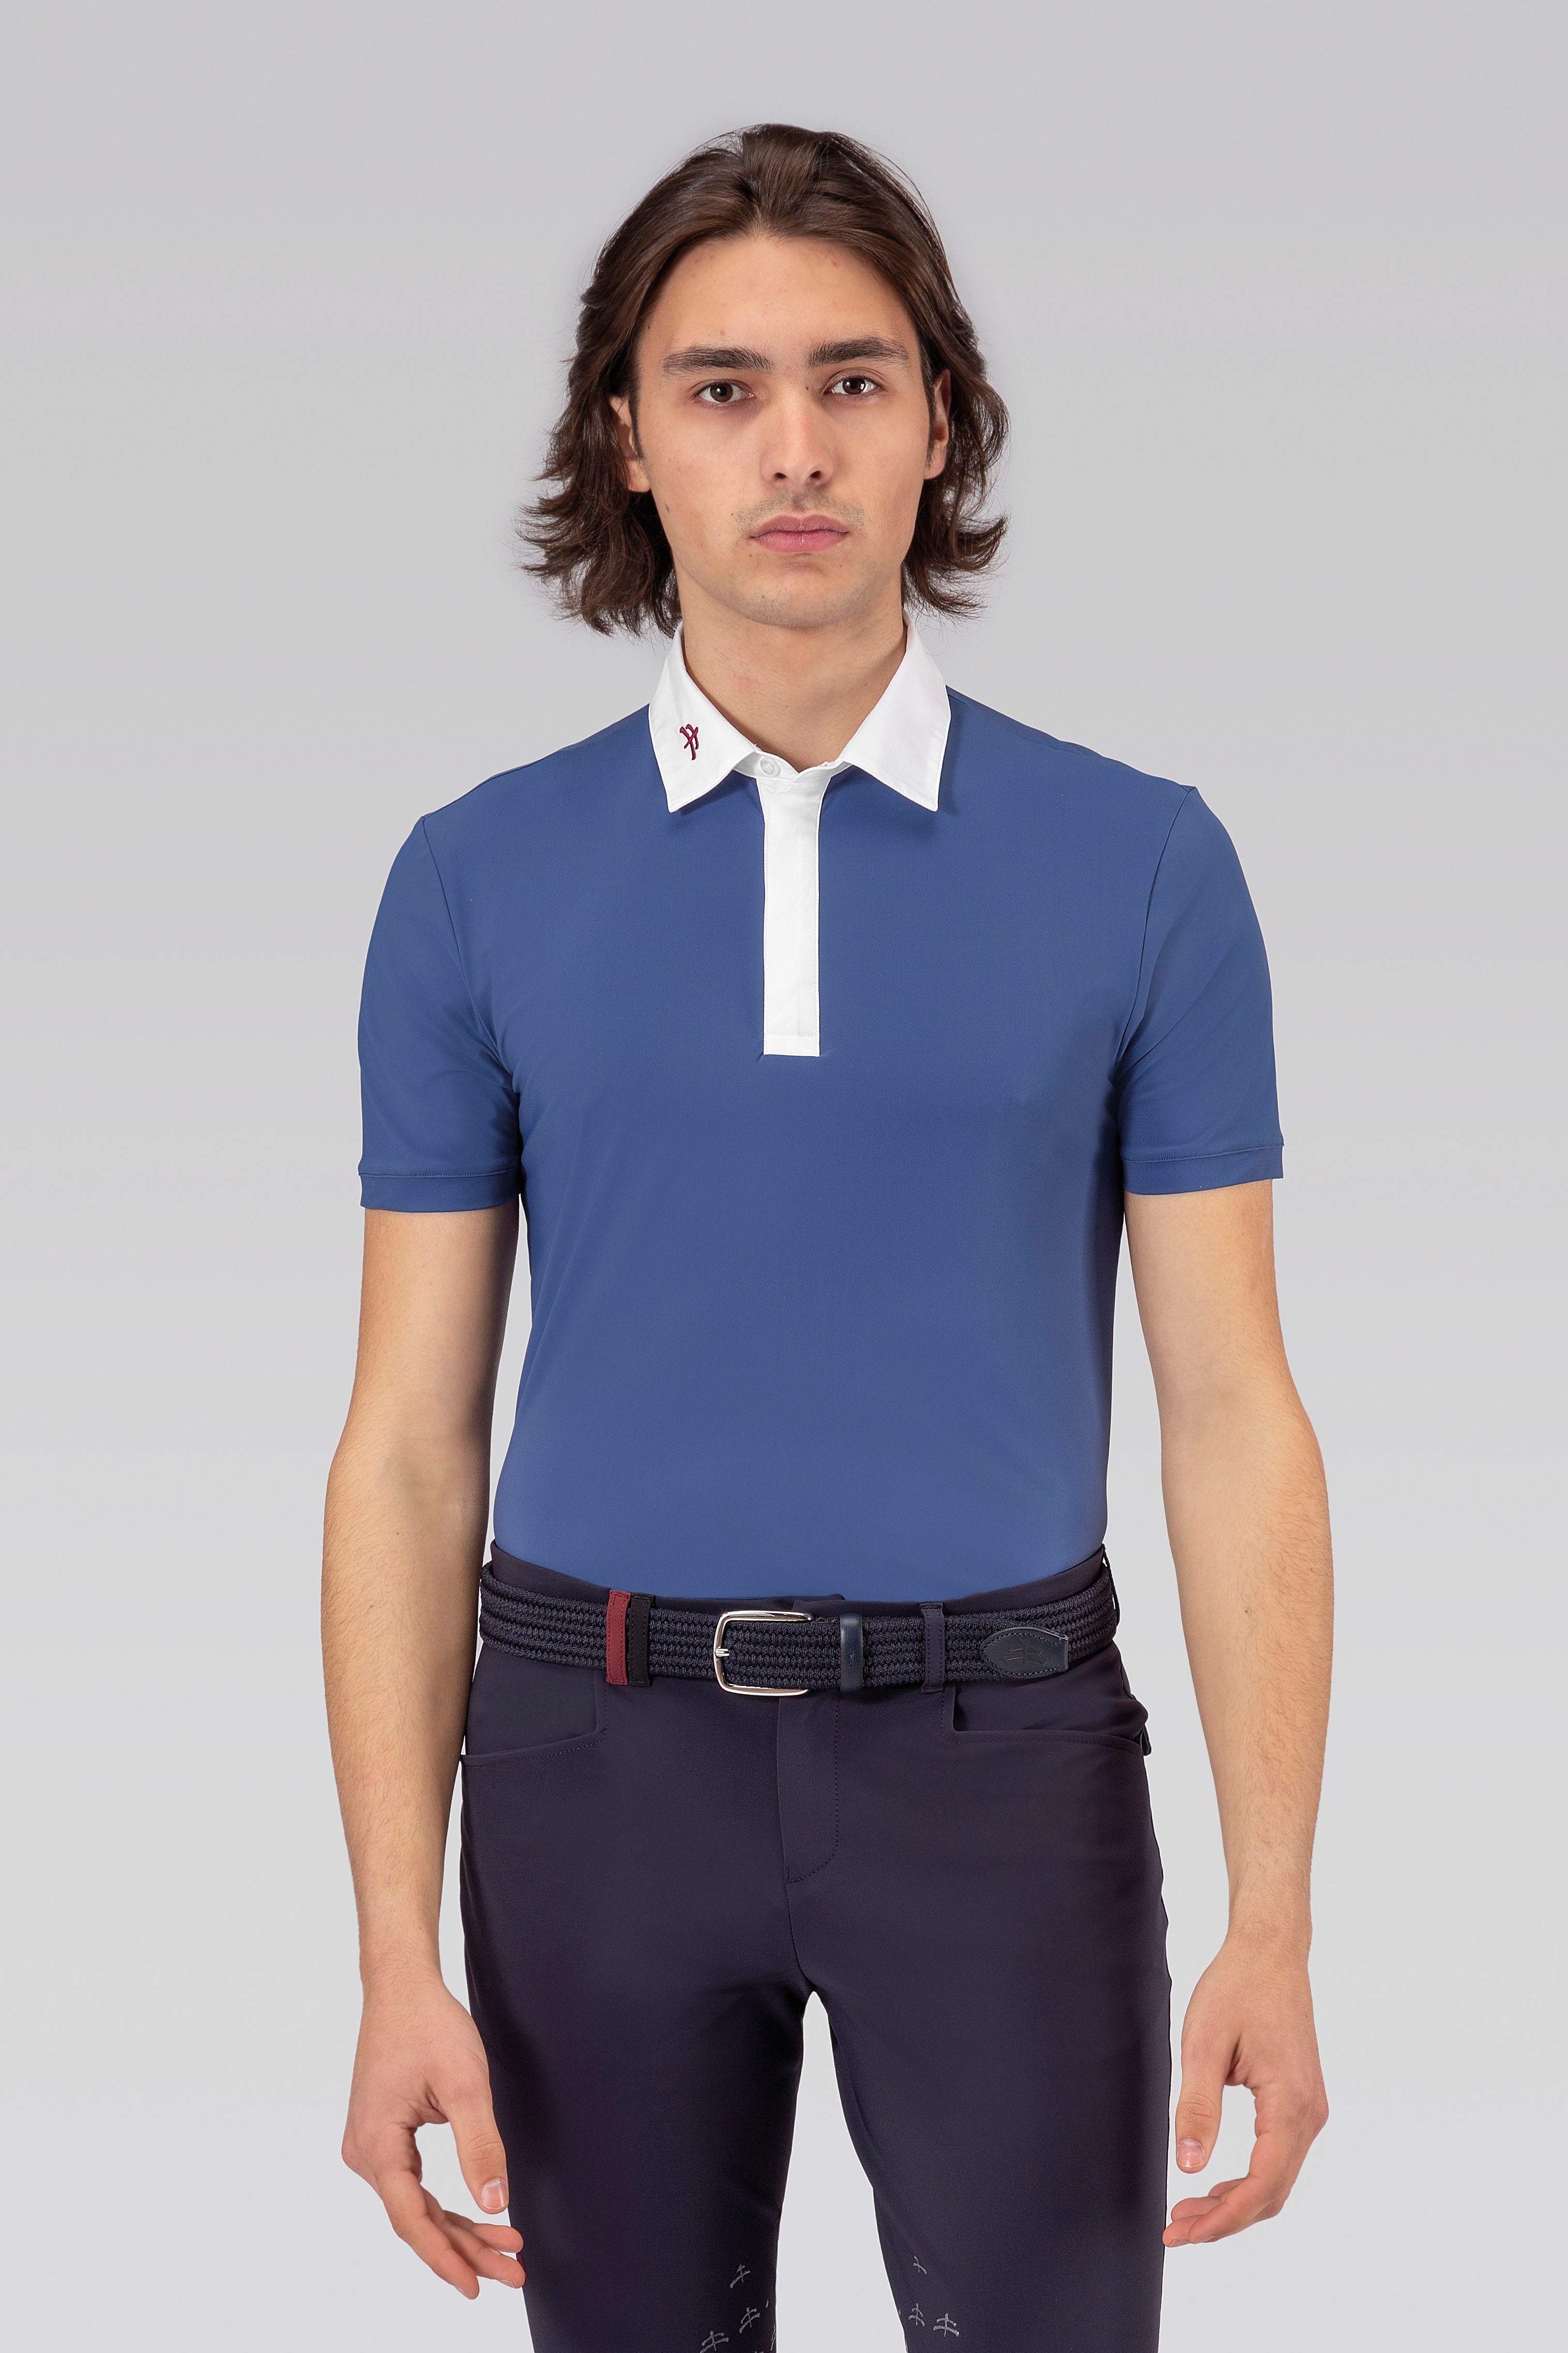 Makebe Italy William Men's Technical Fabric Polo Shirt - Equiluxe Tack